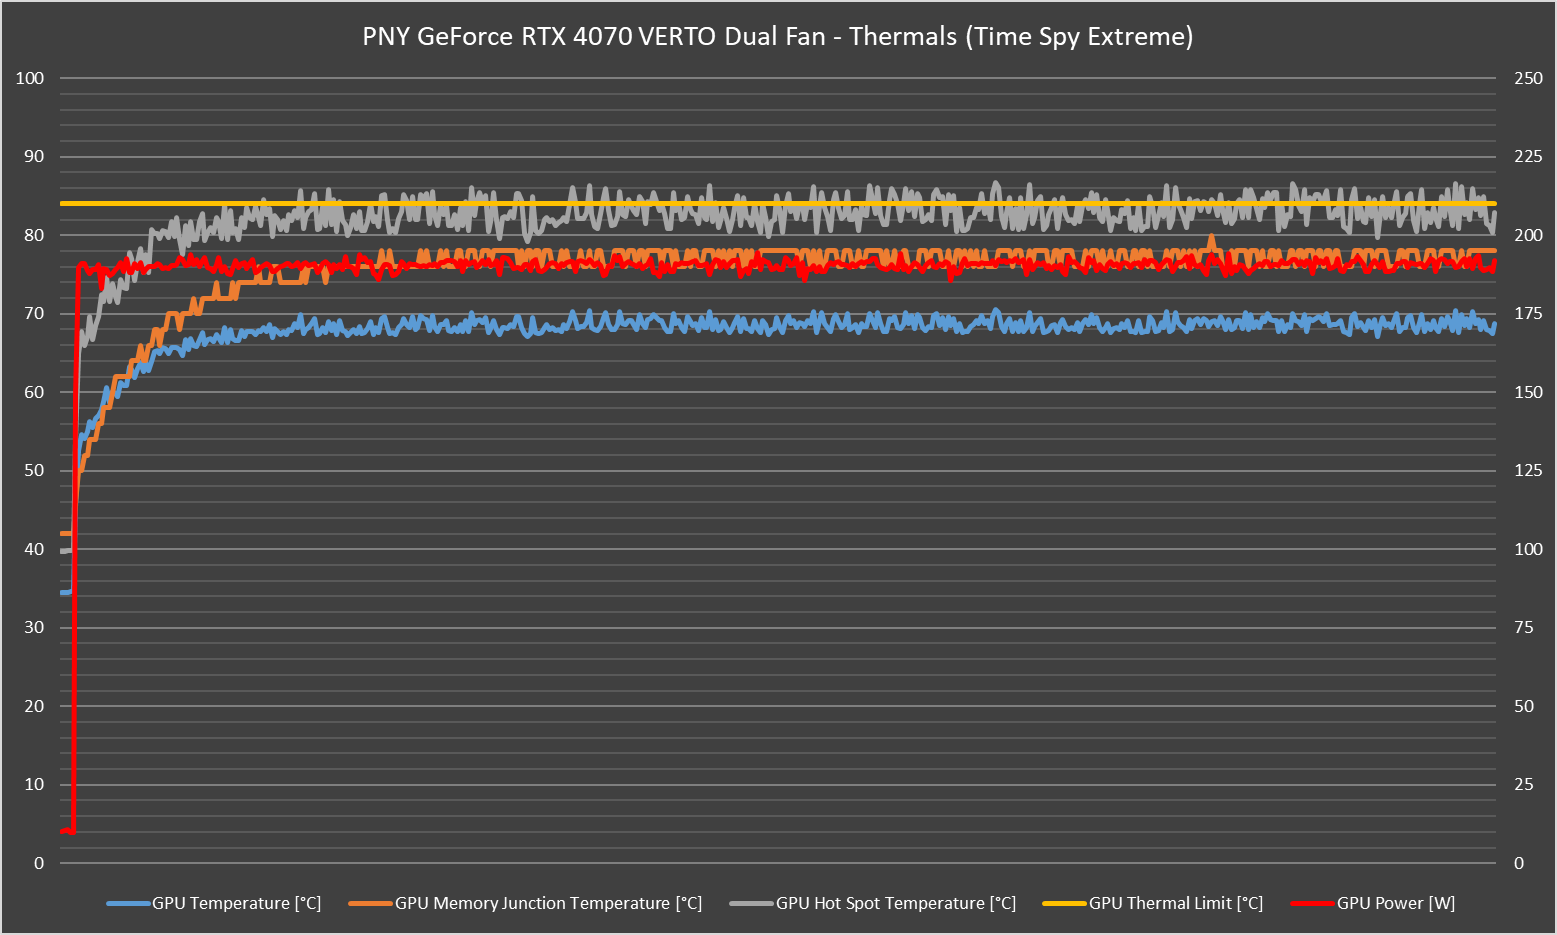 PNY GeForce RTX 4070 12GB VERTO Dual Fan Review - Efficiency Does Not Come Cheap 47